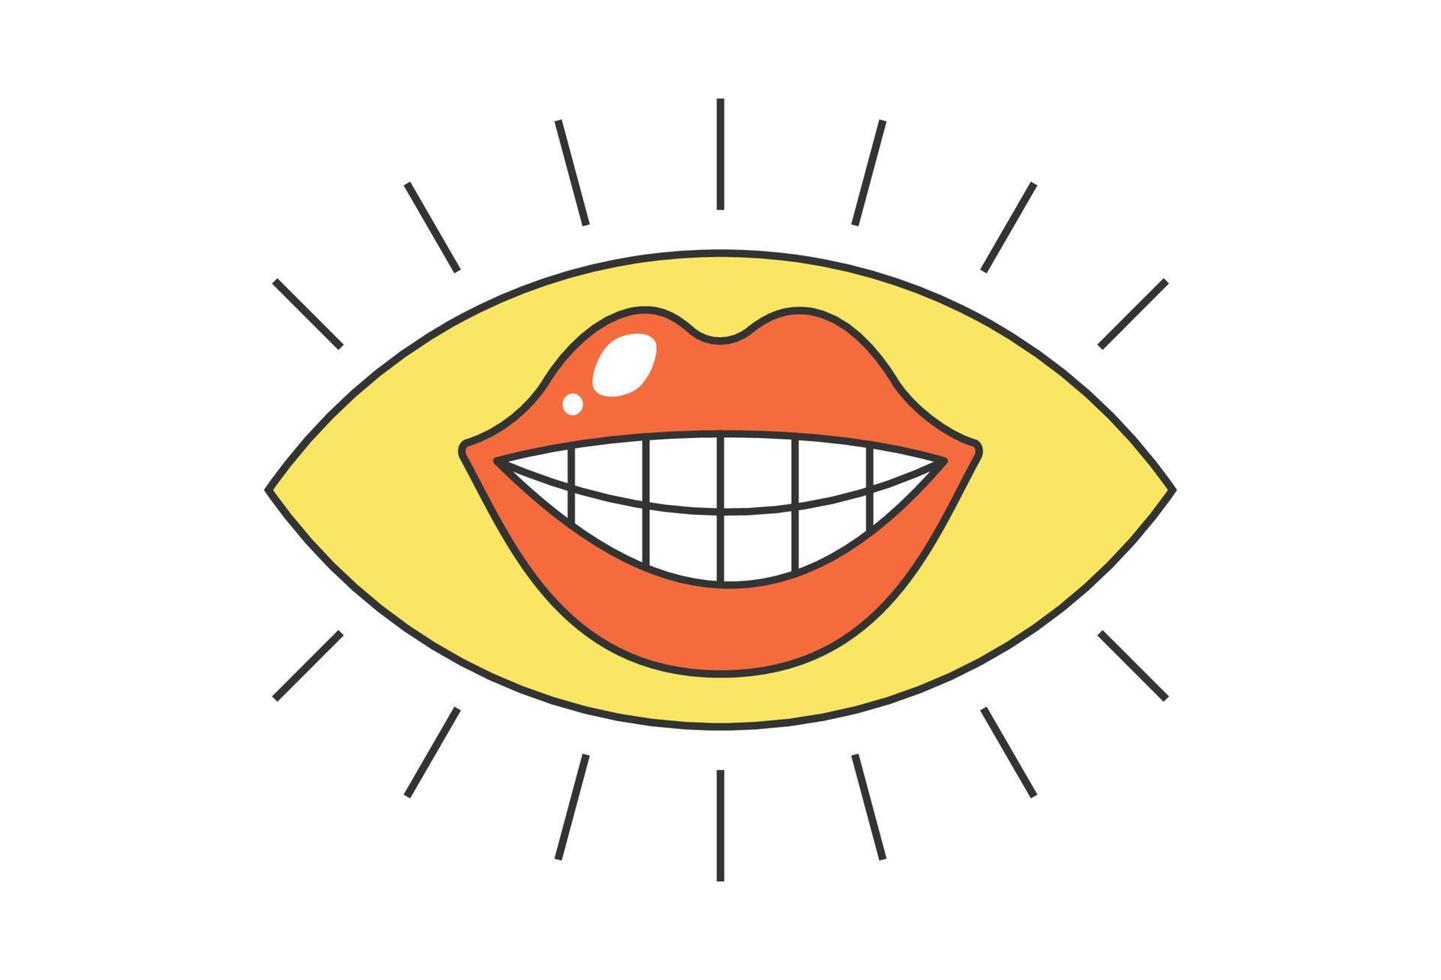 Retro eye with pink lipstick female smiling mouth. Psychedelic groovy hippie style bizarre design. Vintage hippy crazy seductive kiss pupil sticker. Abstract 60s, 70s trendy y2k. Trippy pop art. Eps vector